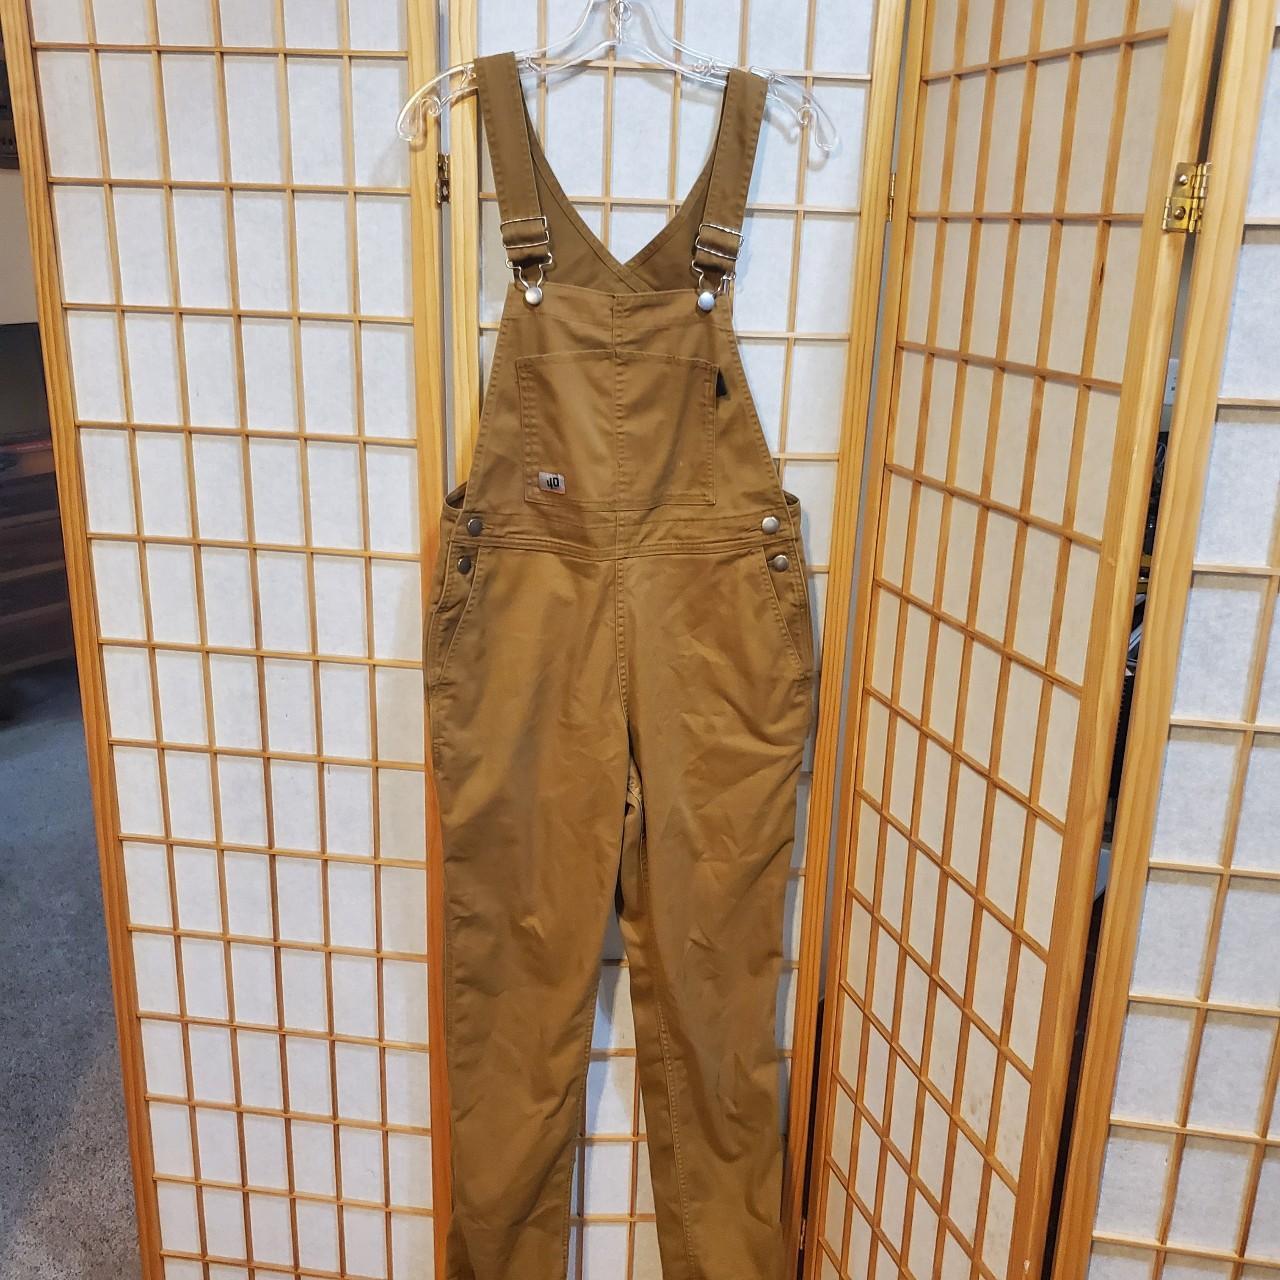 Duluth Trading Company Women's Tan Dungarees-overalls (2)